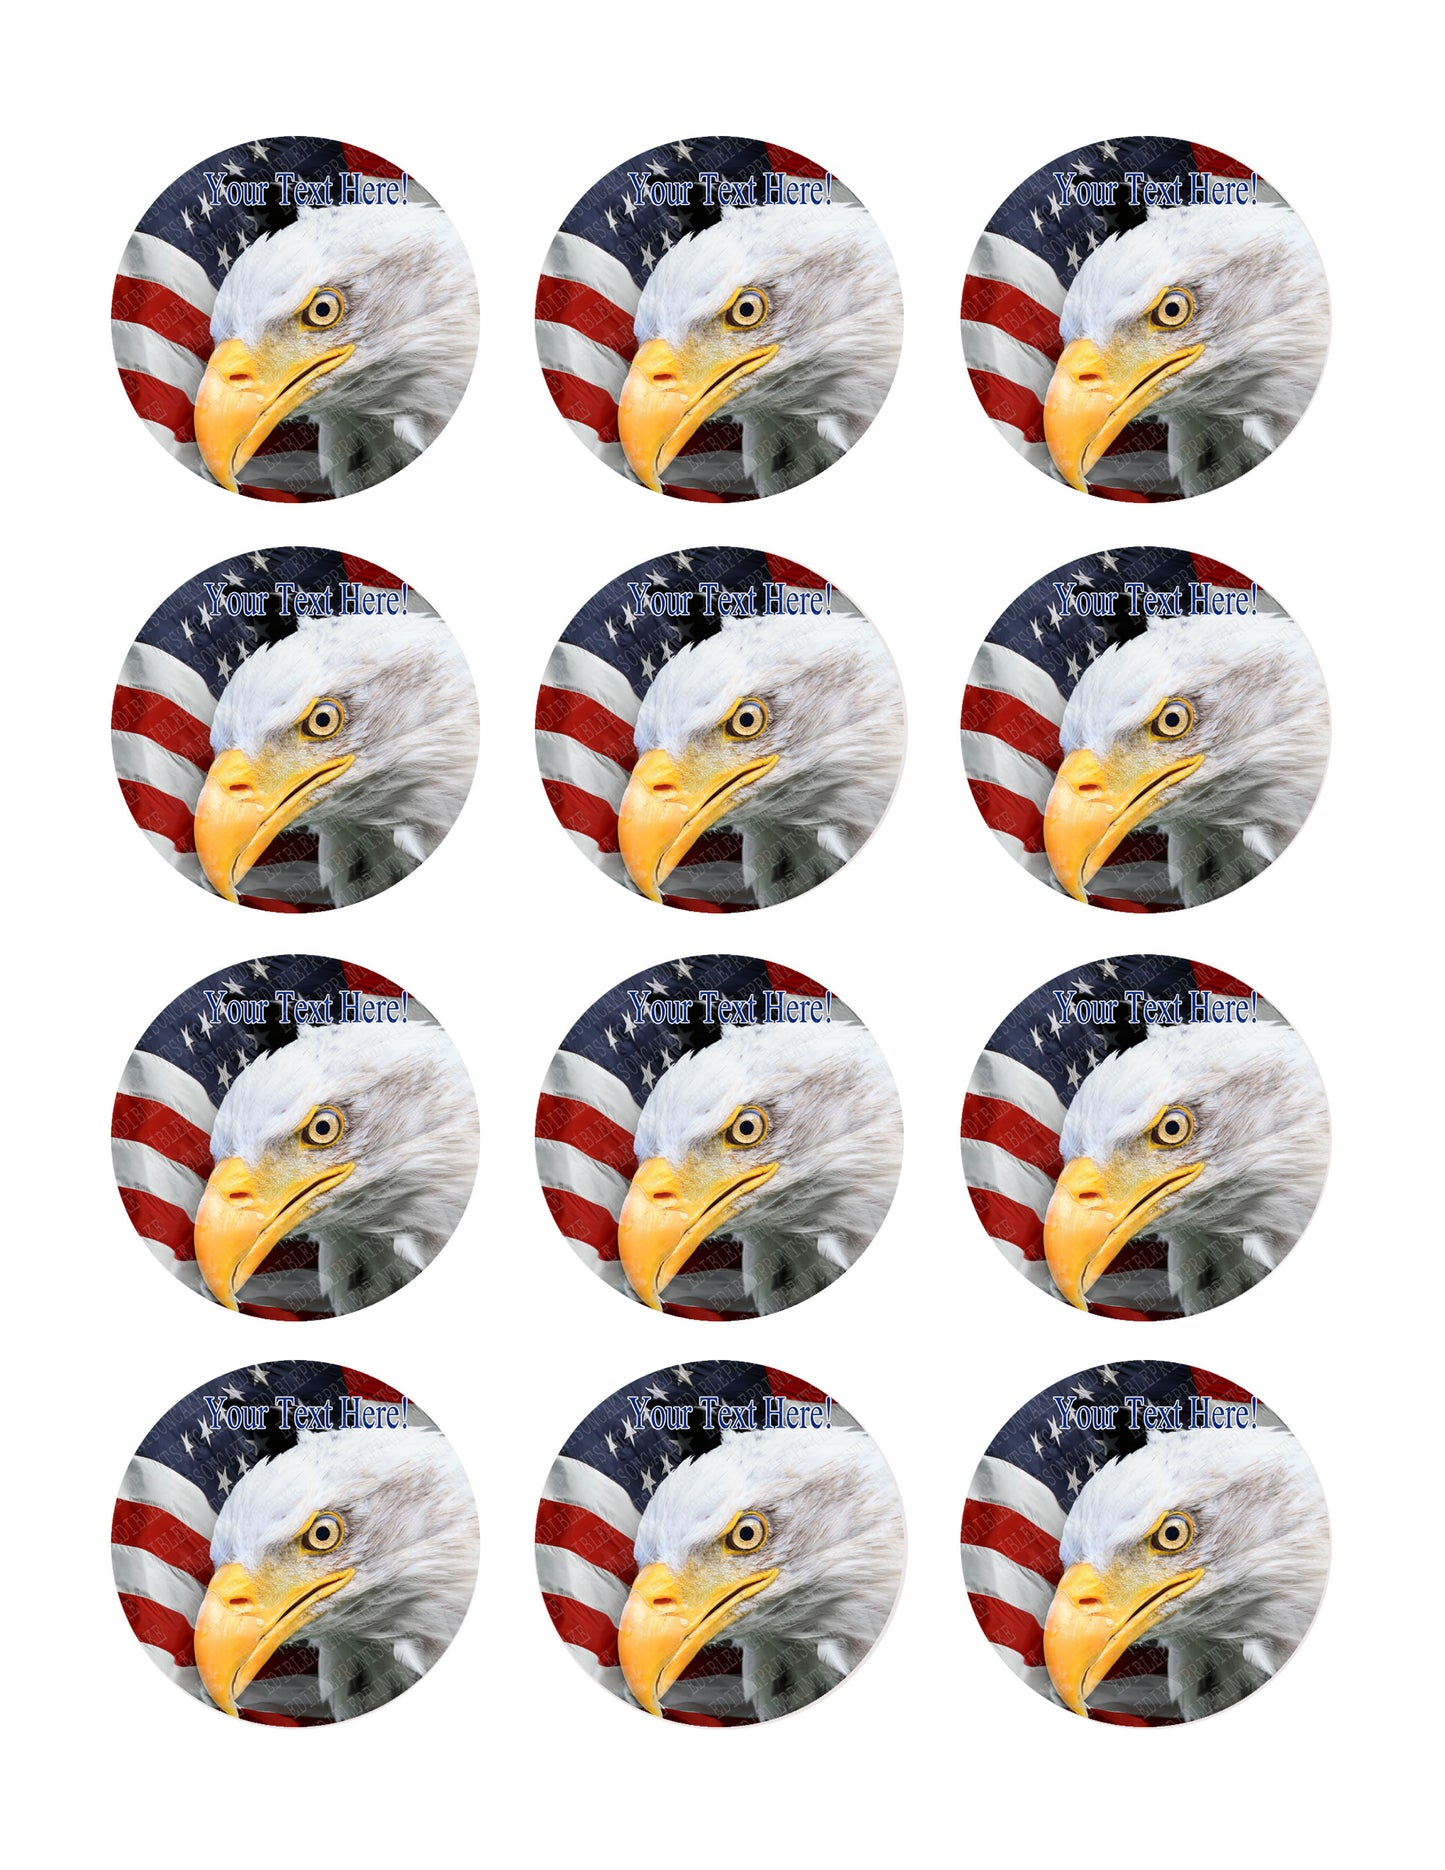 American Flag with Eagle Head - Edible Cake Topper, Cupcake Toppers, Strips